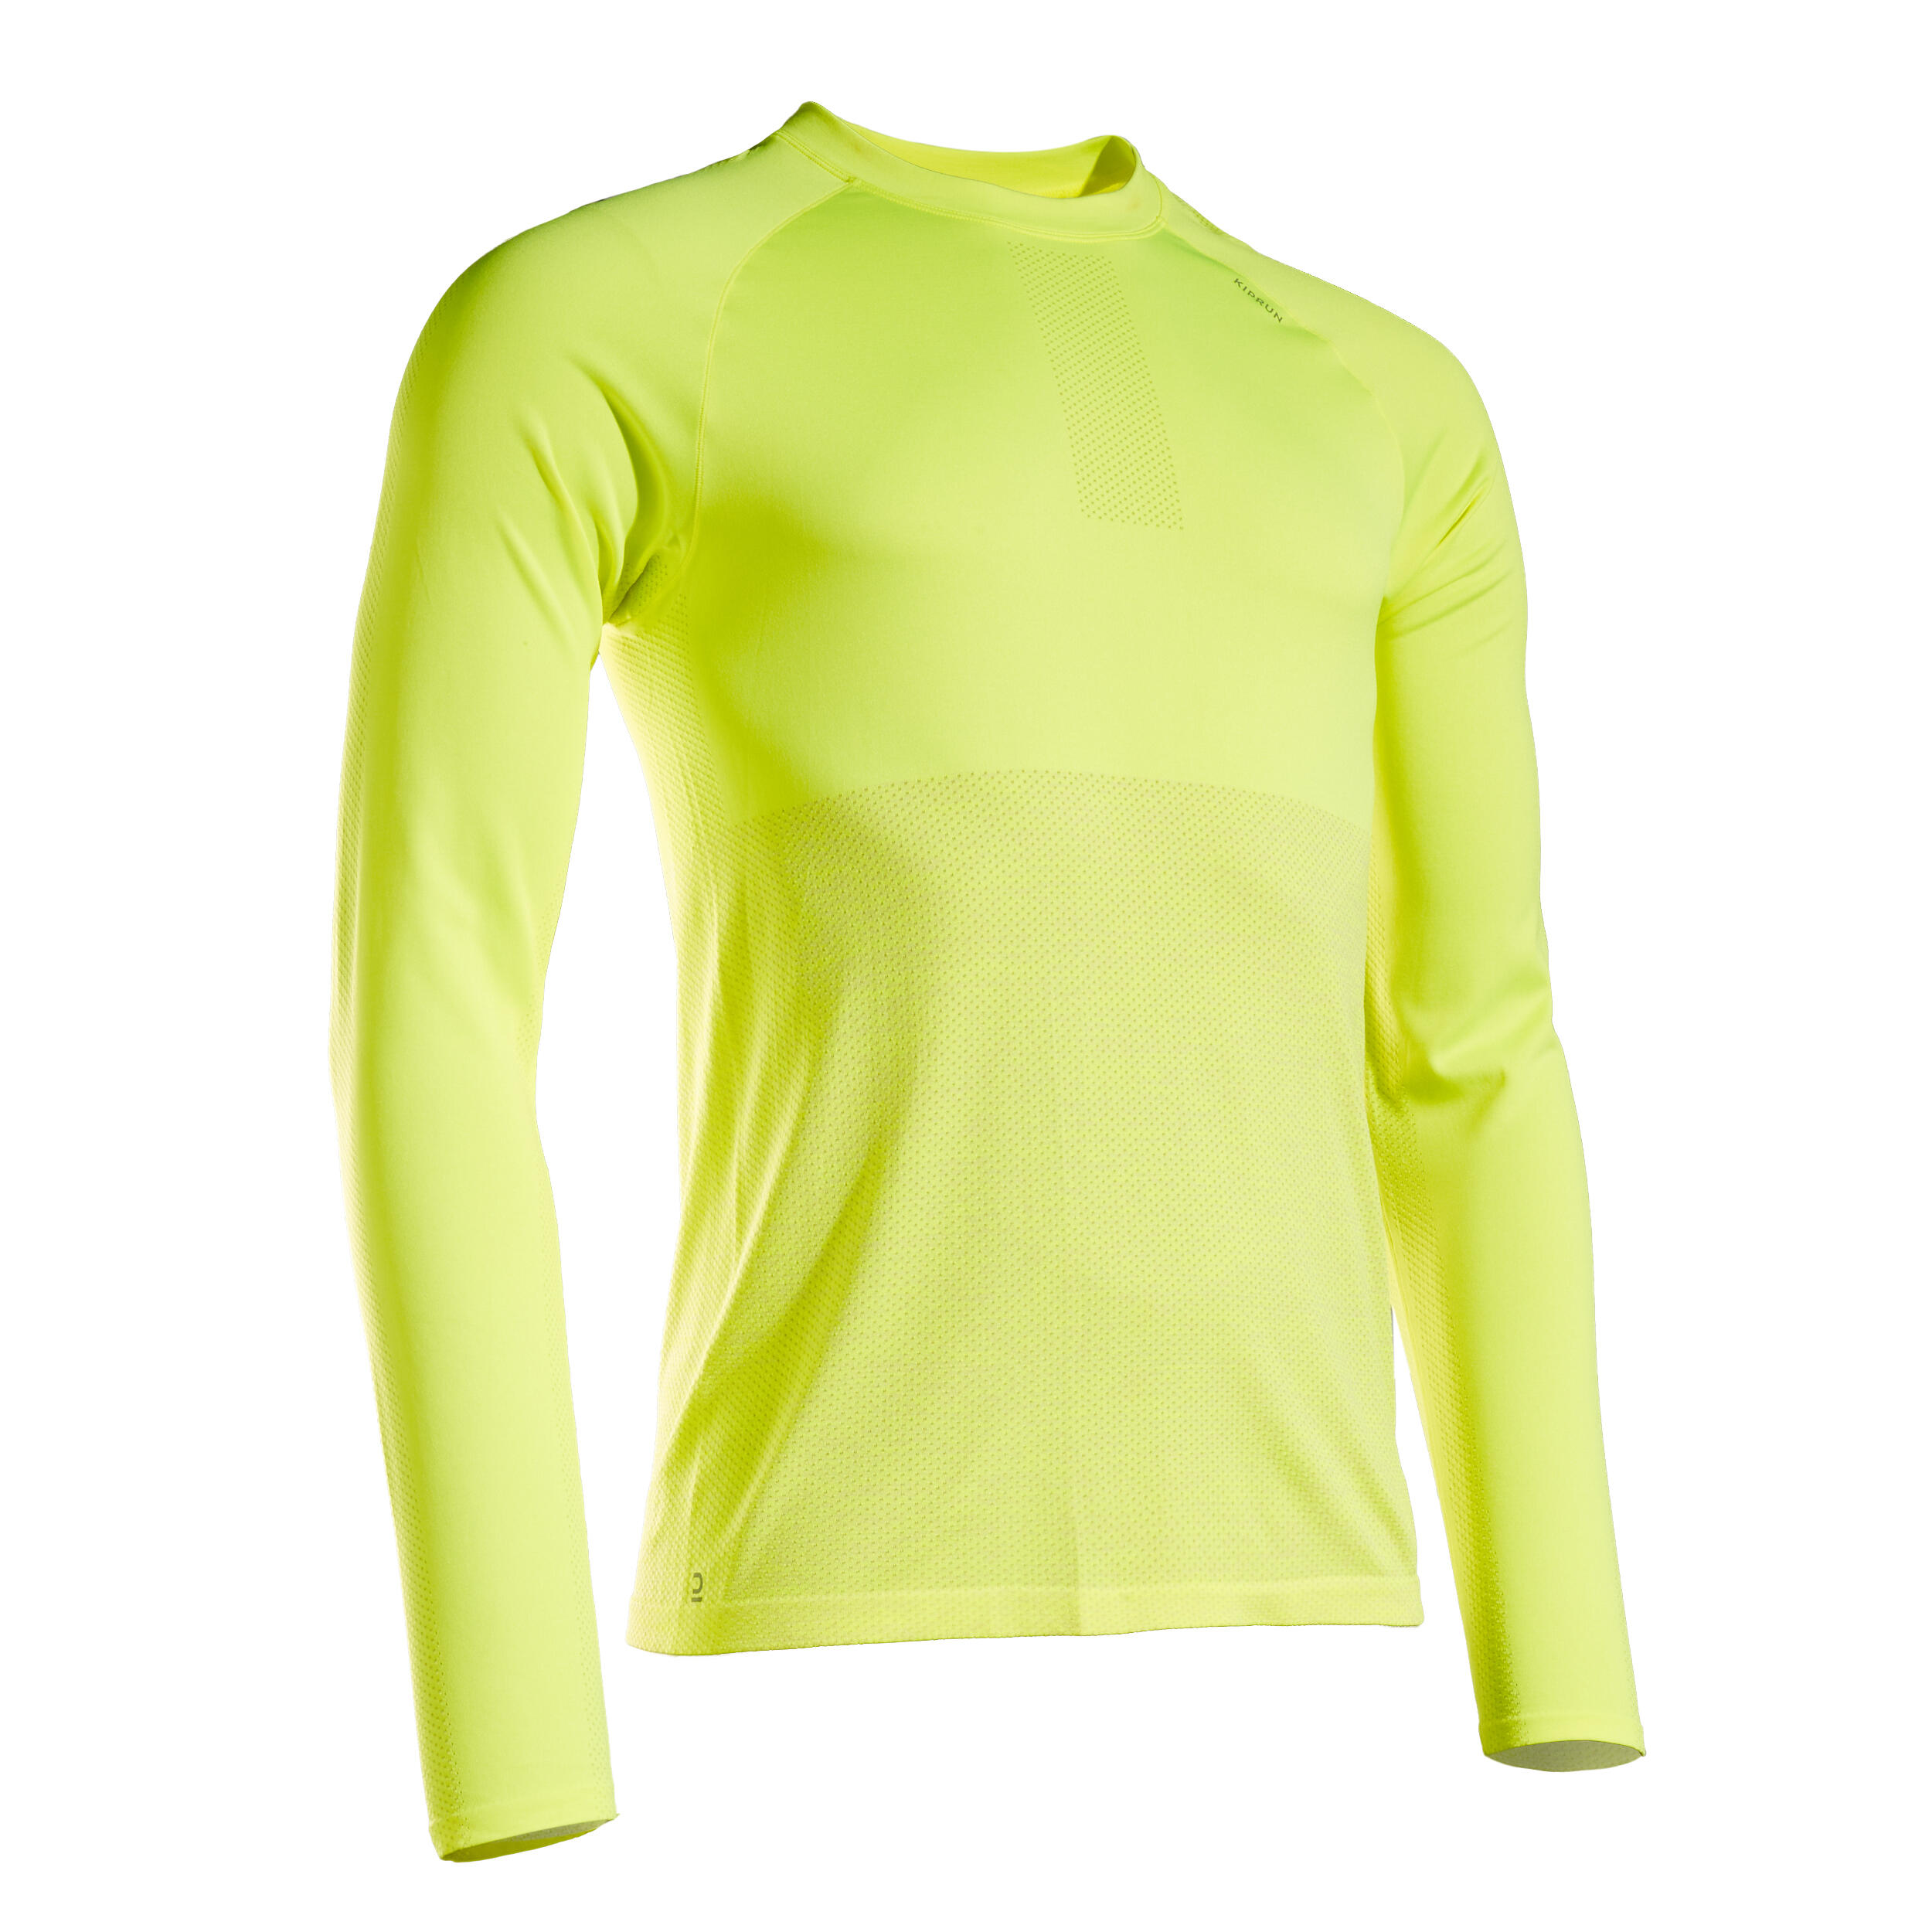 CARE MEN'S BREATHABLE LONG-SLEEVED RUNNING T-SHIRT - YELLOW 9/9